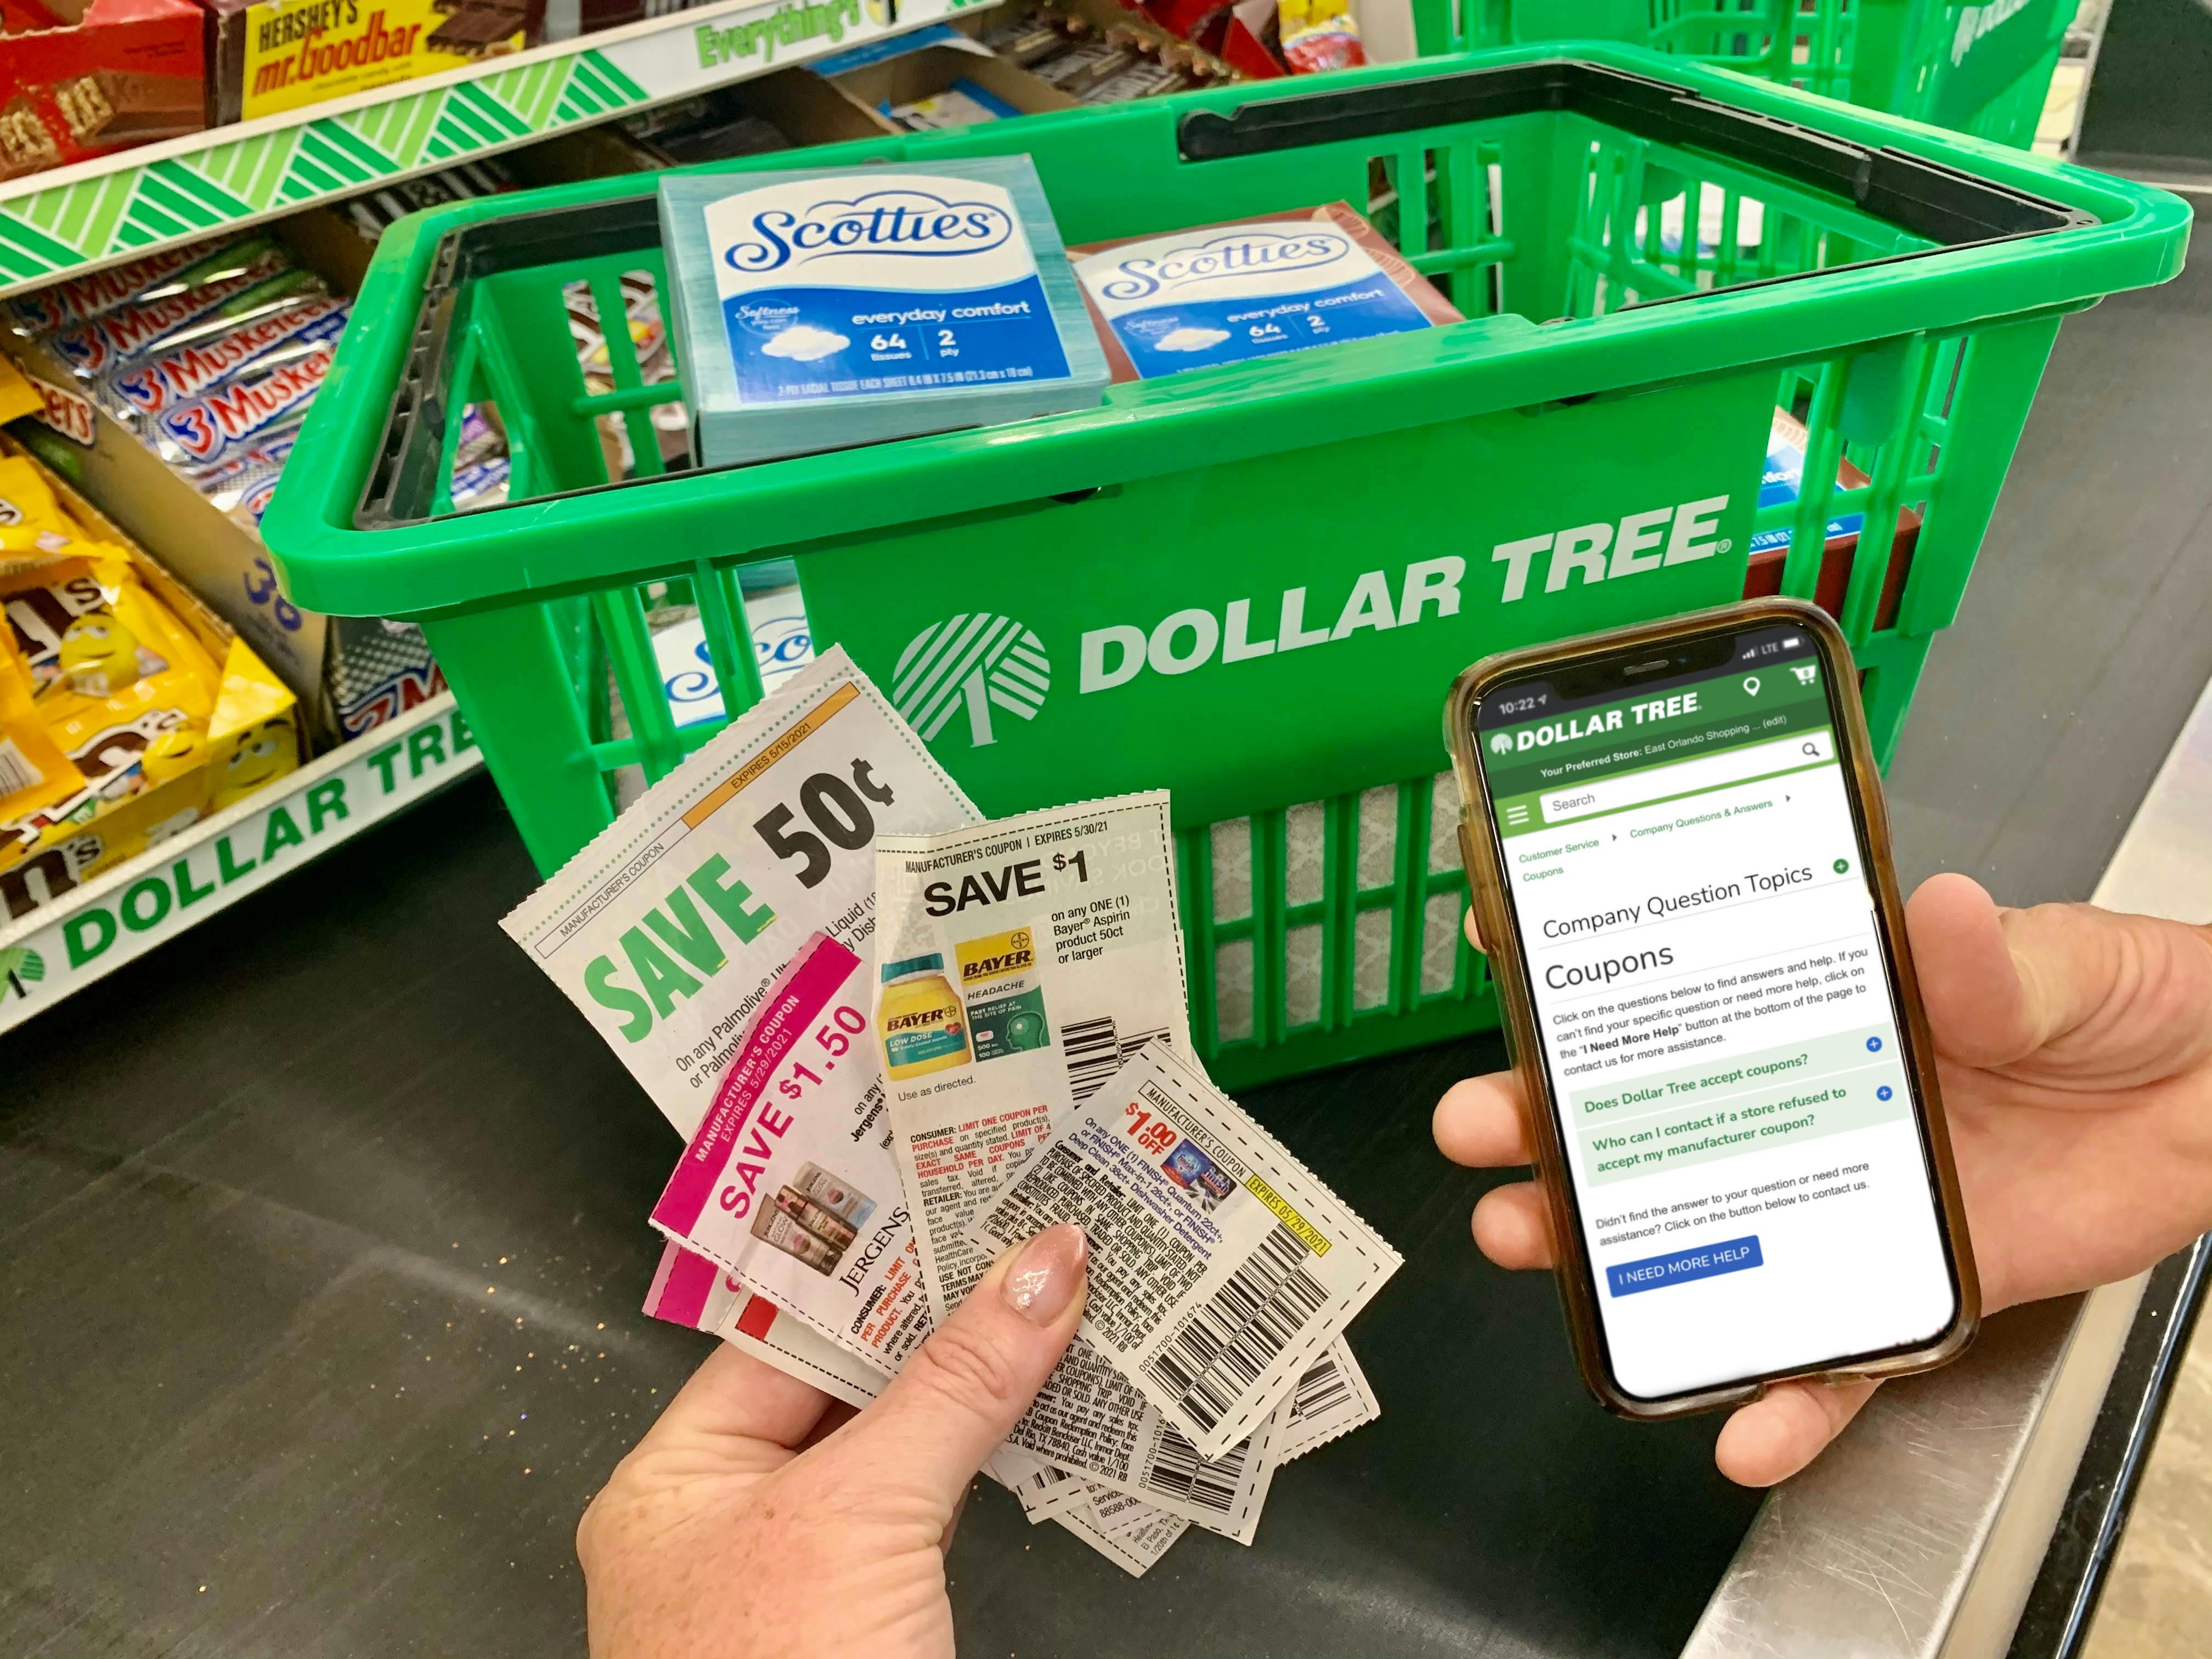 hands holding coupons and a cellphone showing Dollar Tree's coupon policy next to a Dollar Tree basket at checkout